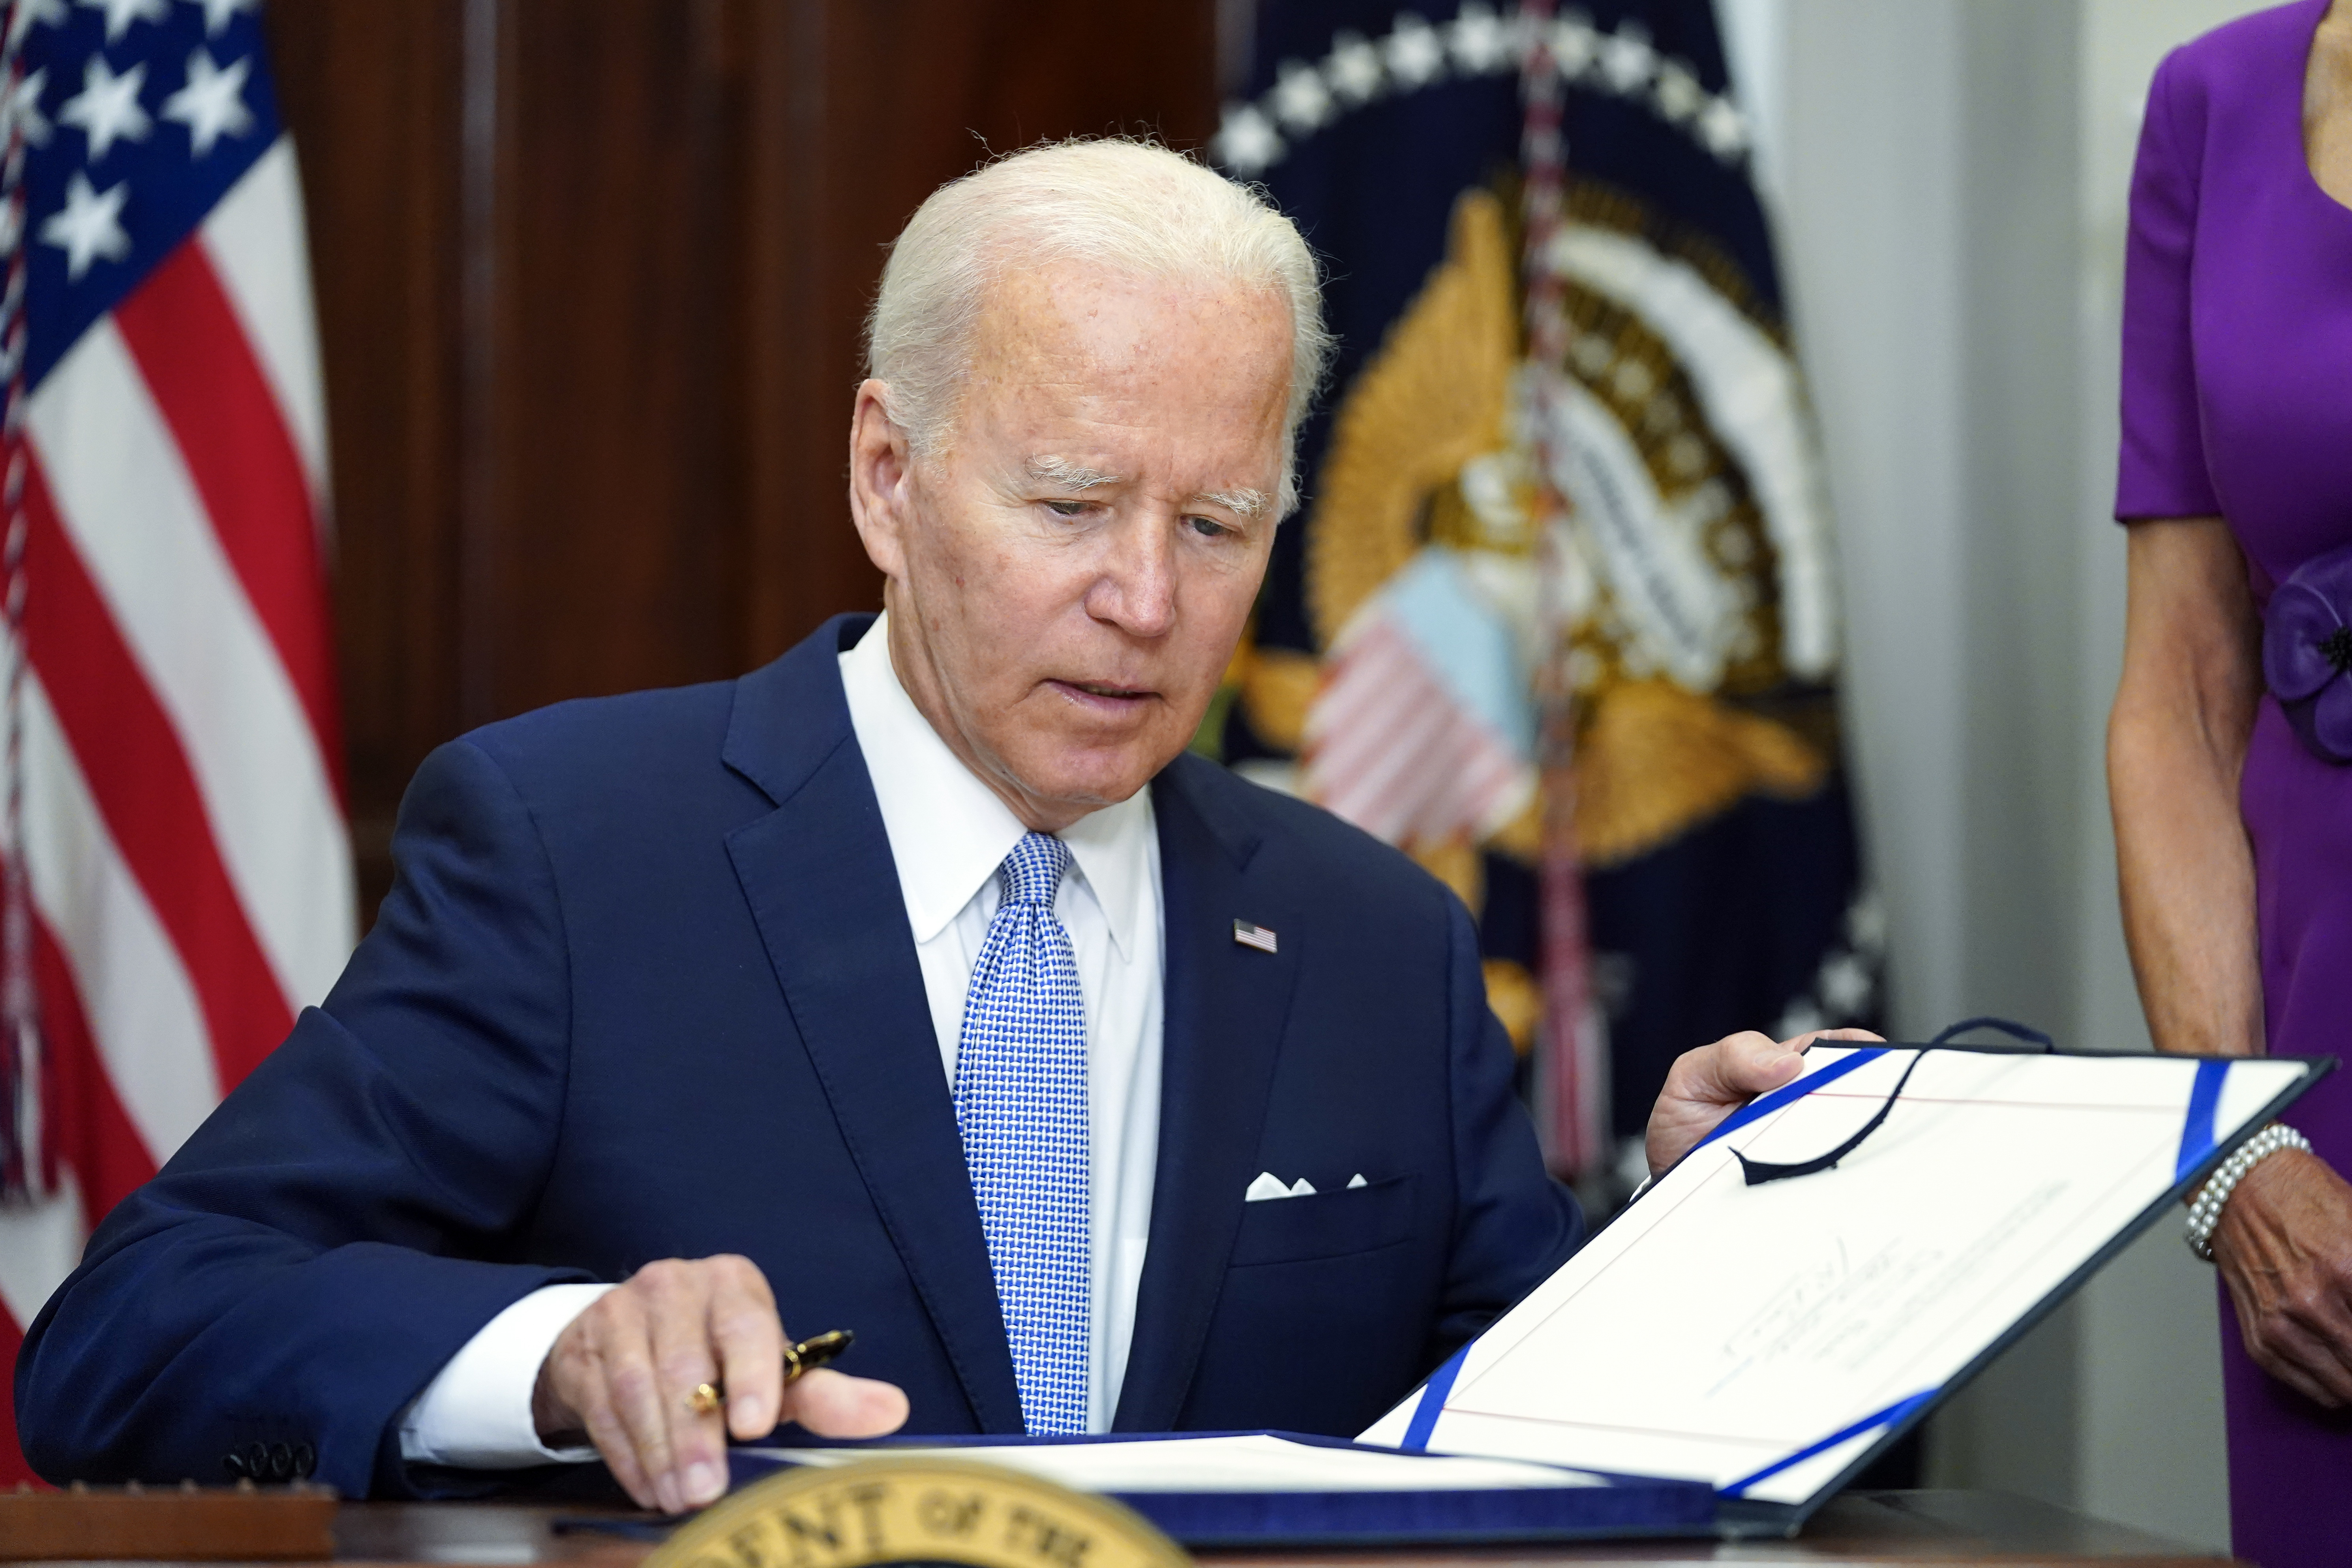 President Joe Biden signs into law S. 2938, the Bipartisan Safer Communities Act gun safety bill, in the Roosevelt Room of the White House in Washington, Saturday, June 25, 2022. (AP Photo/Pablo Martinez Monsivais)